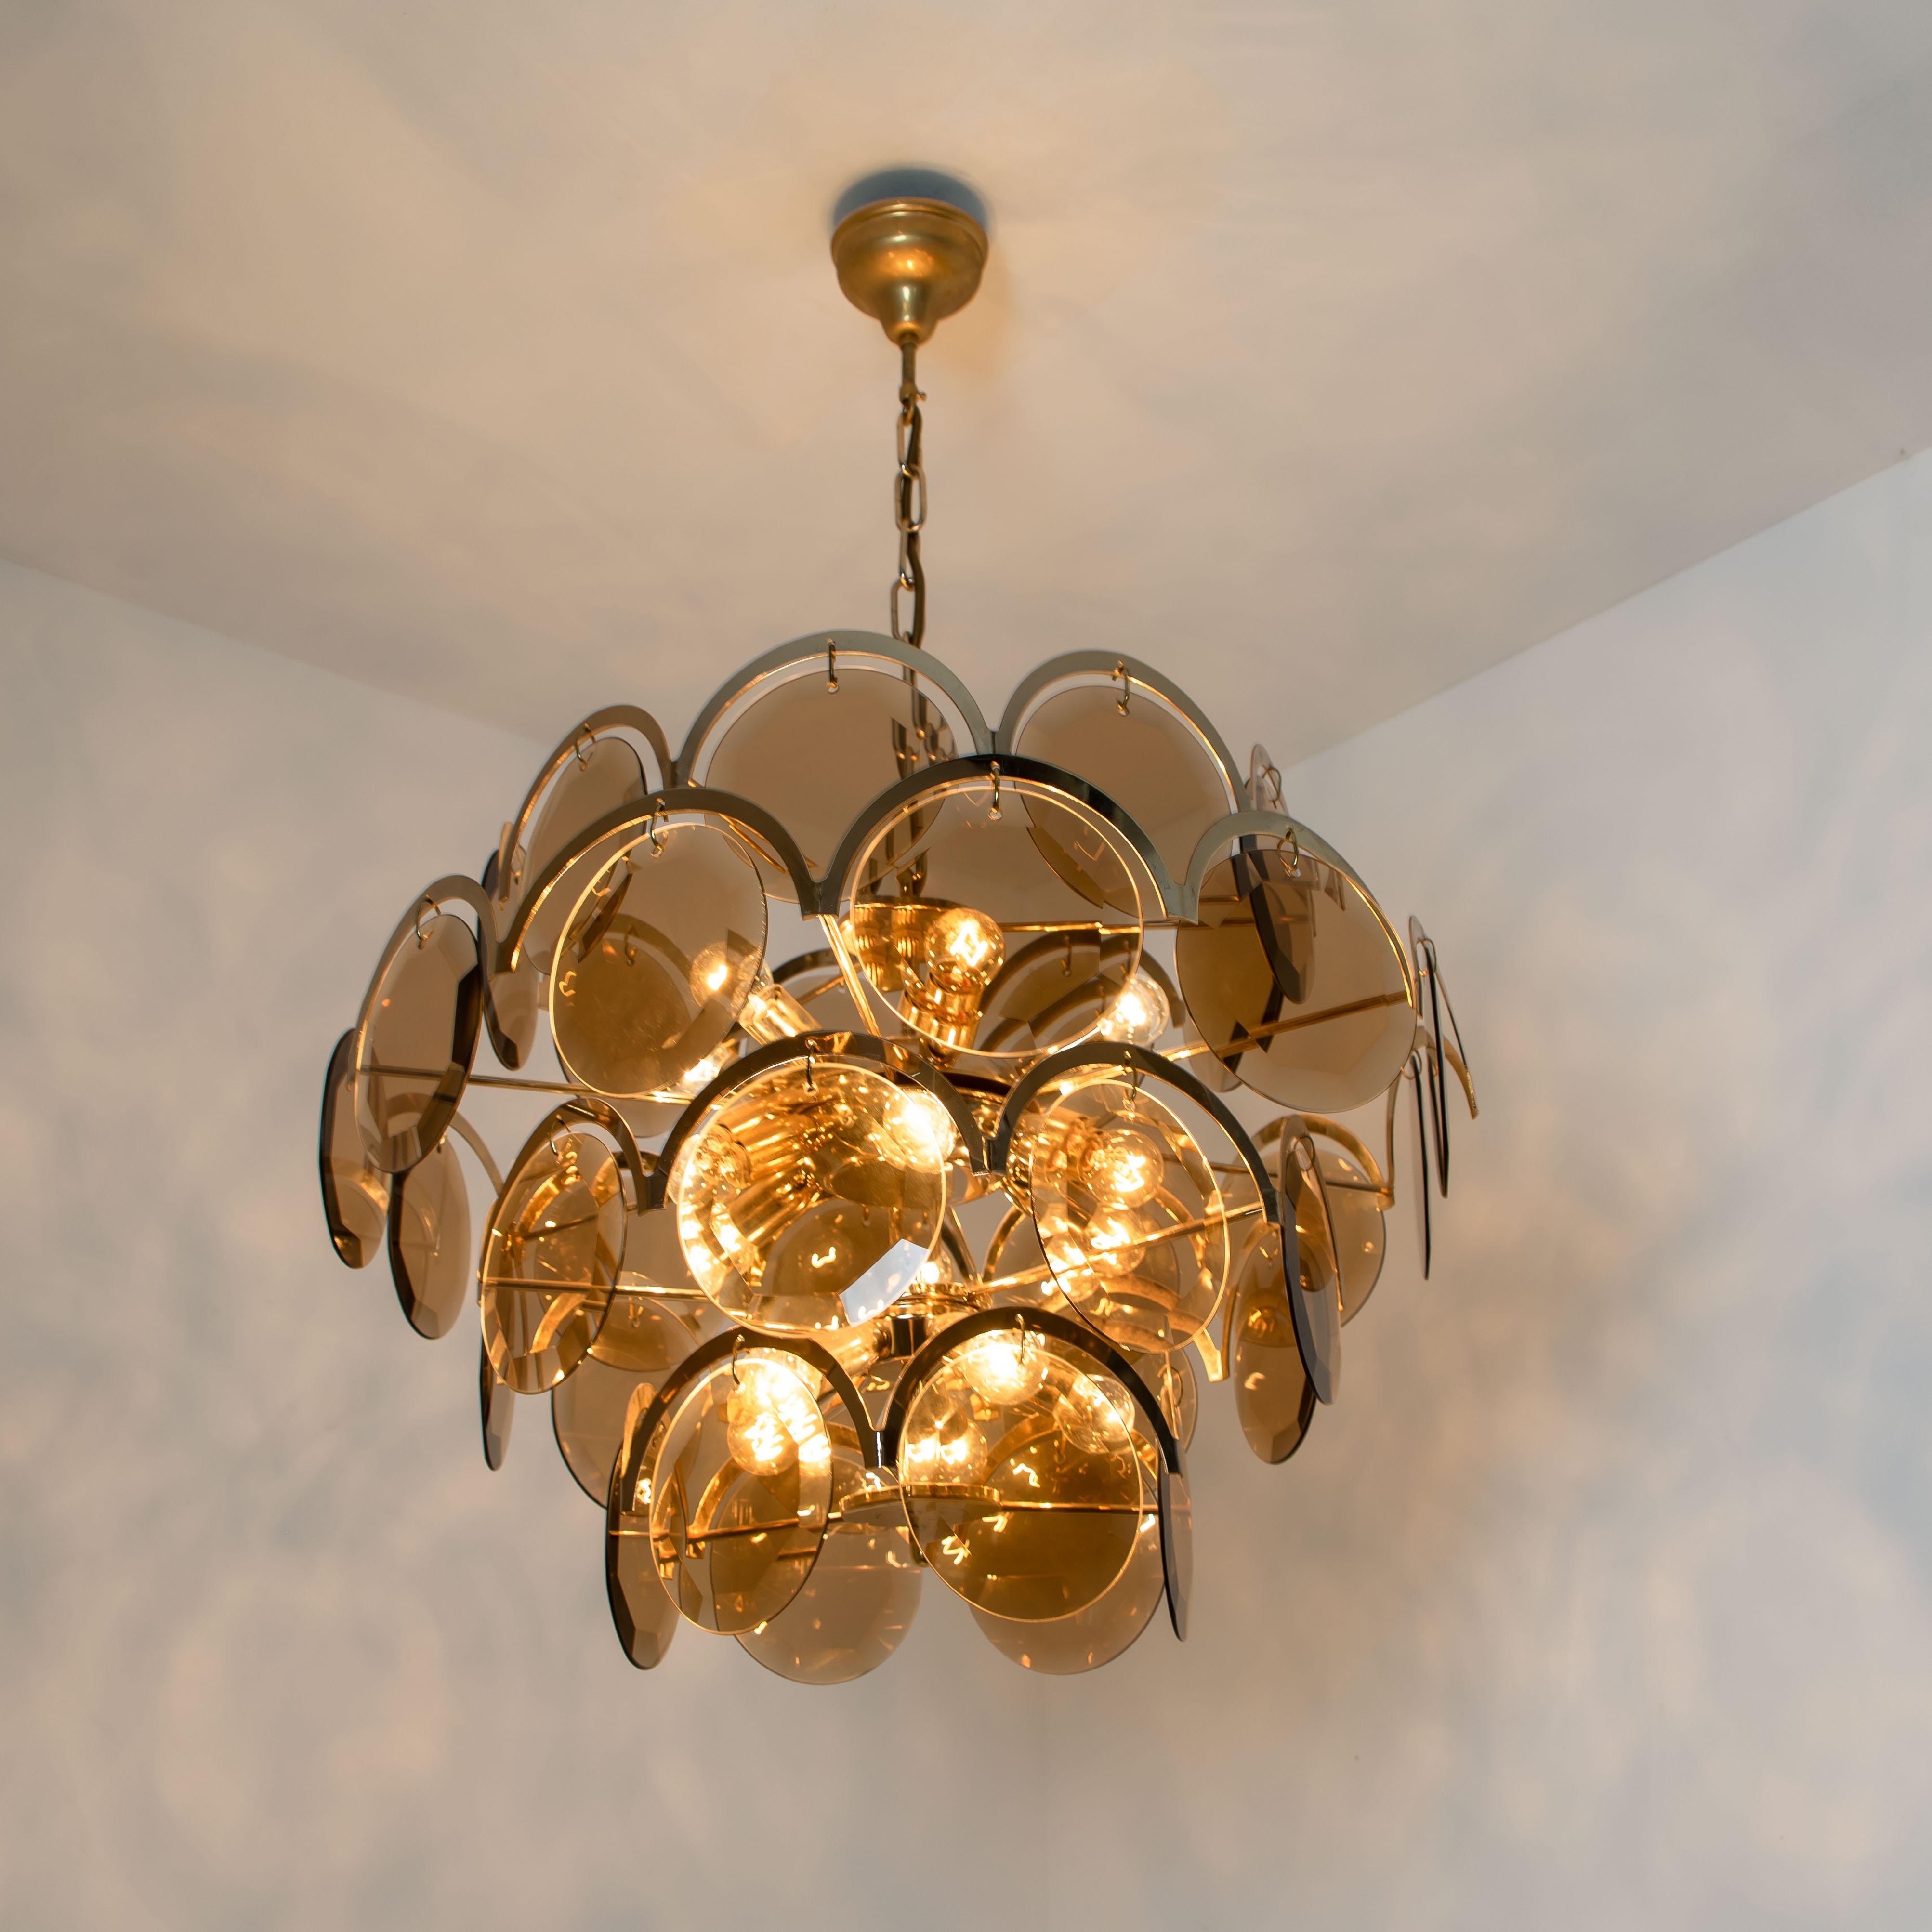 Large Smoked Glass and Brass Chandelier in the Style of Vistosi, Italy For Sale 3